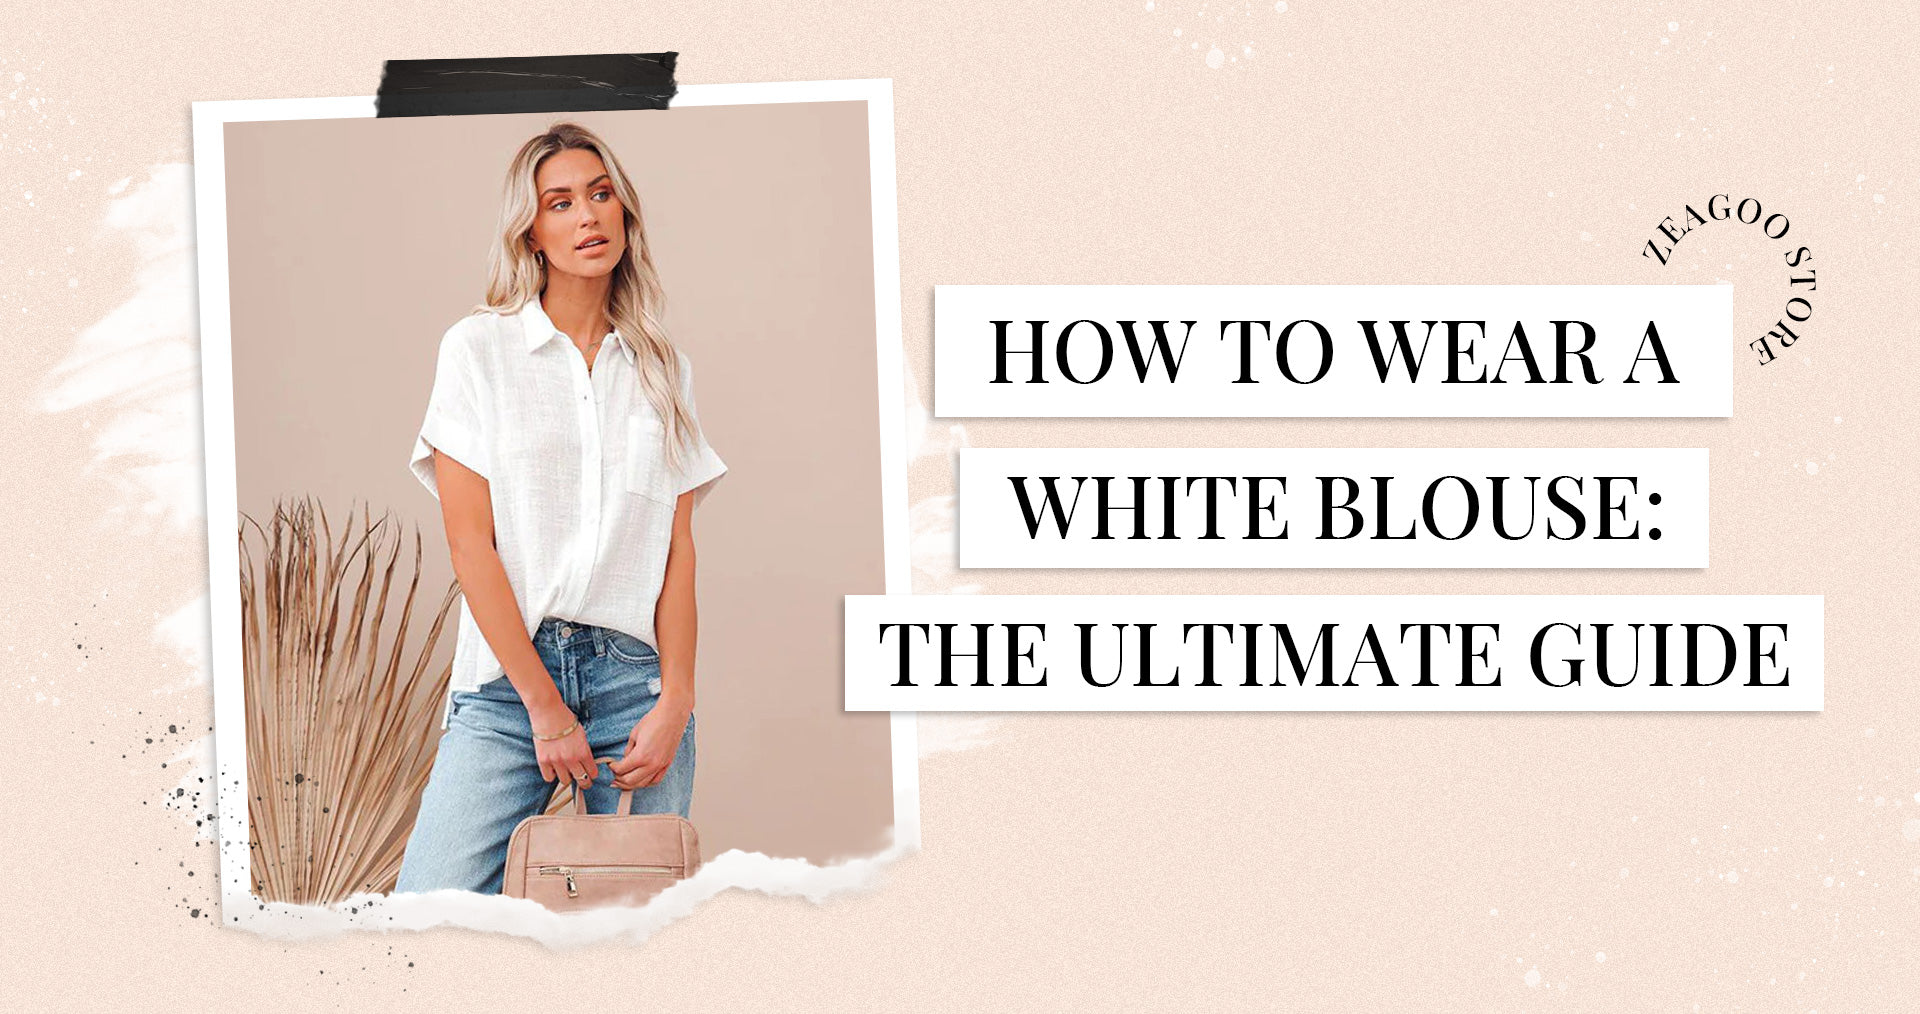 How To Wear A White Blouse: The Ultimate Guide